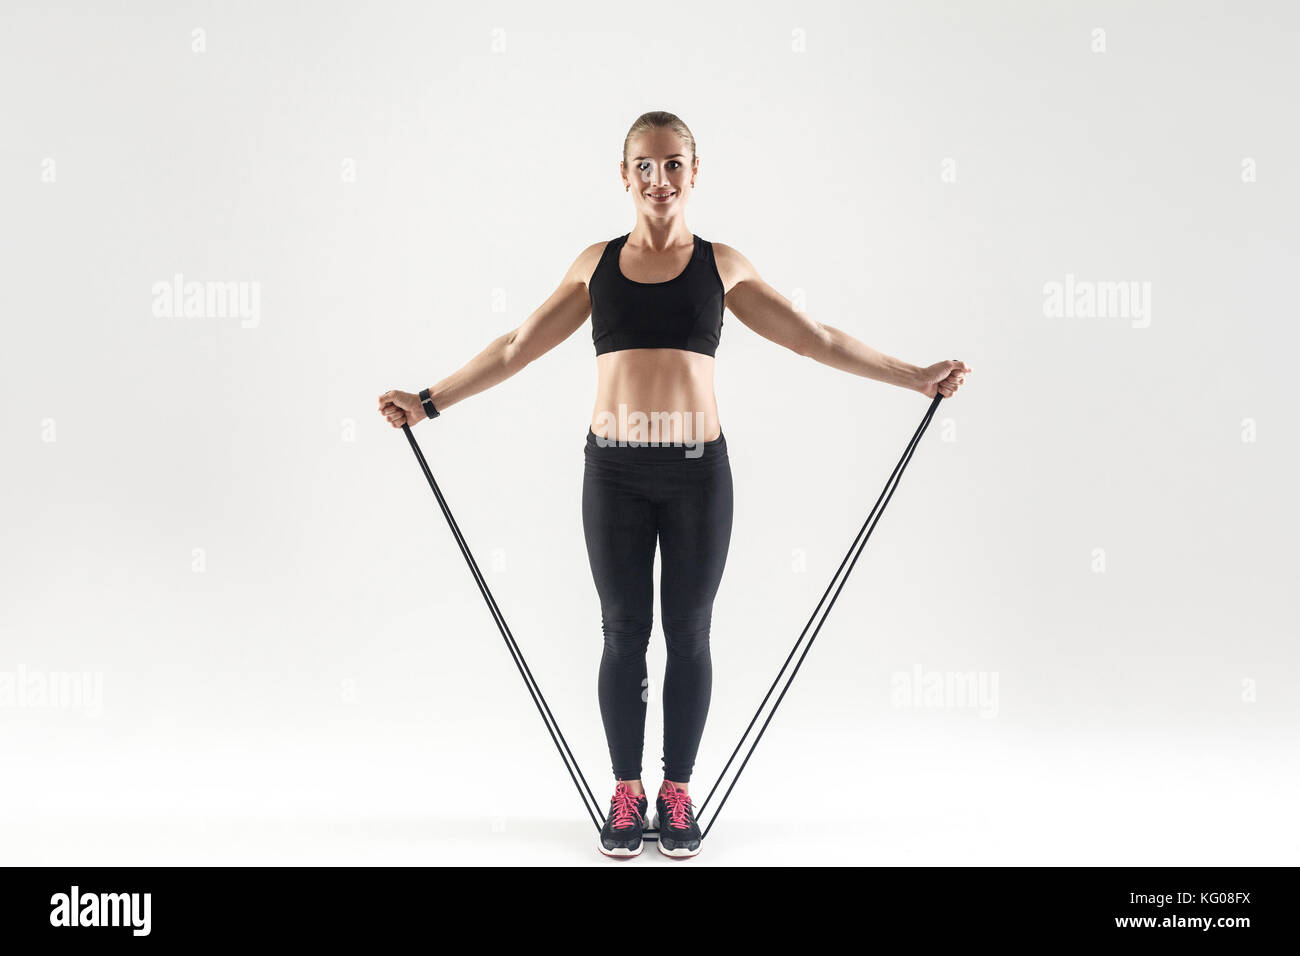 TRX training. Activity happiness woman holding skipping rope, toothy smiling and looking at camera. Studio shot, gray background Stock Photo